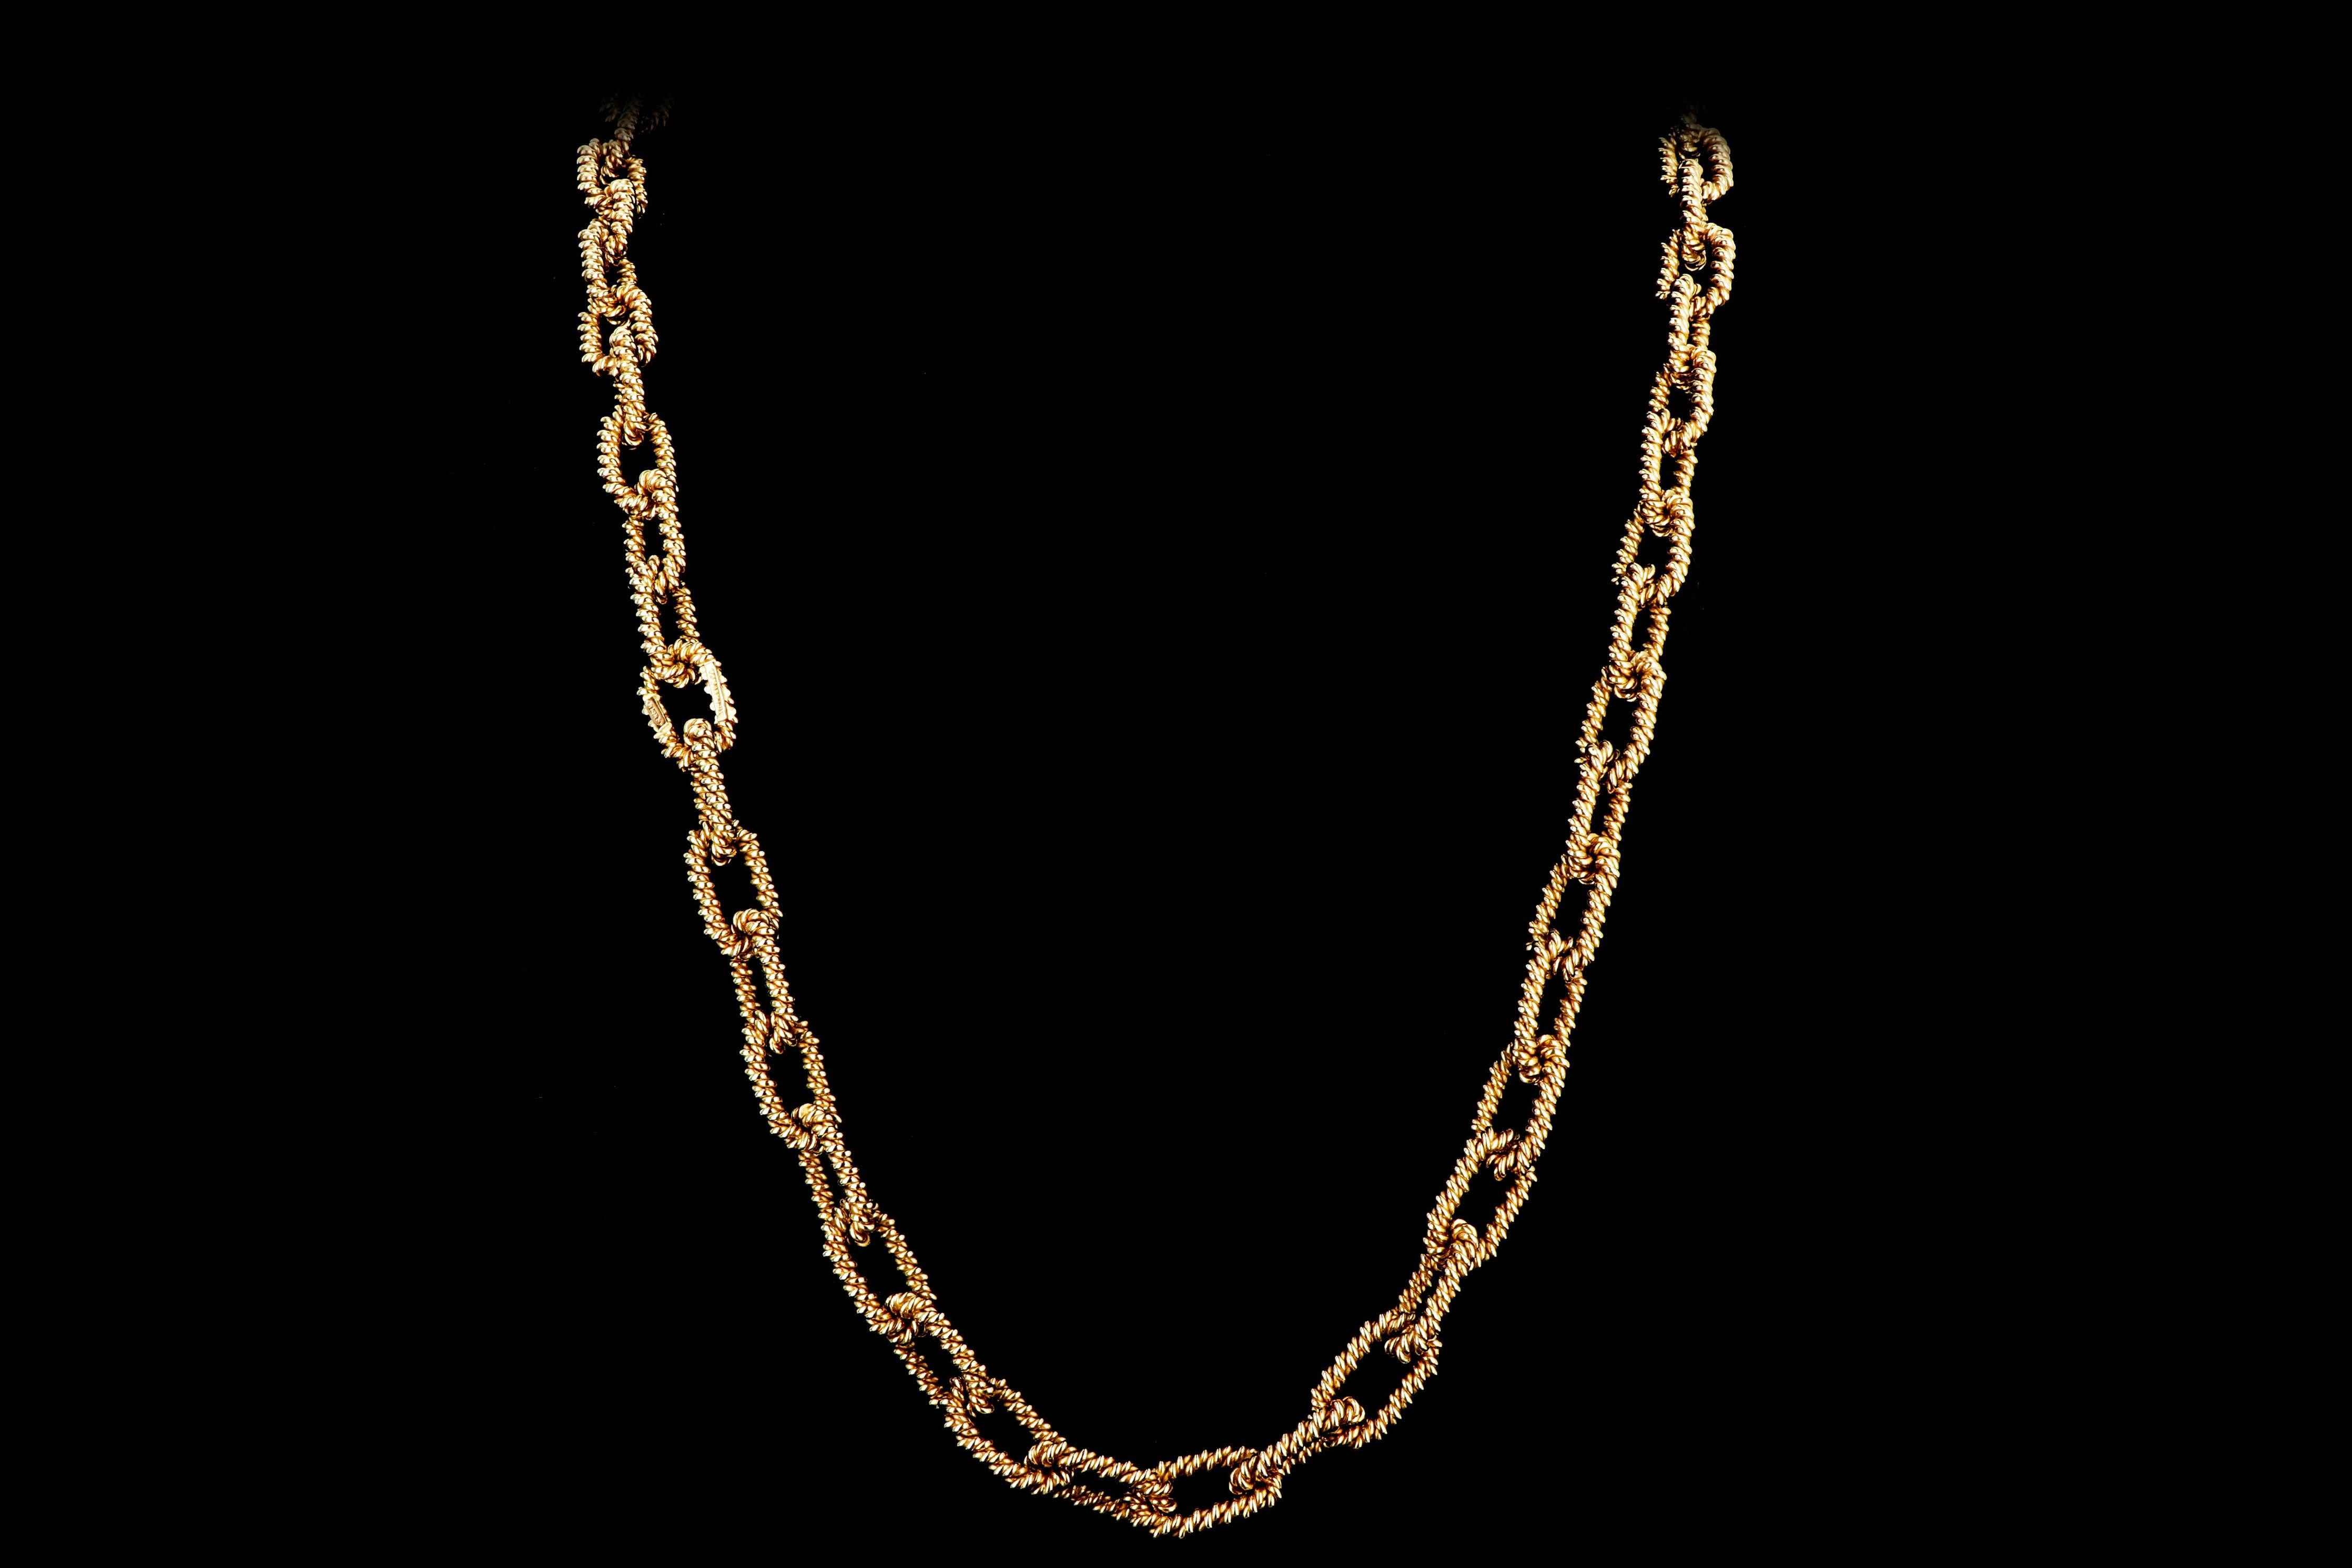 Era: Vintage

Designer: Tiffany & Co

Composition: 14K Yellow Gold

Necklace Weight: 105.5 DWT

Necklace Length: 30''

XLTTTX